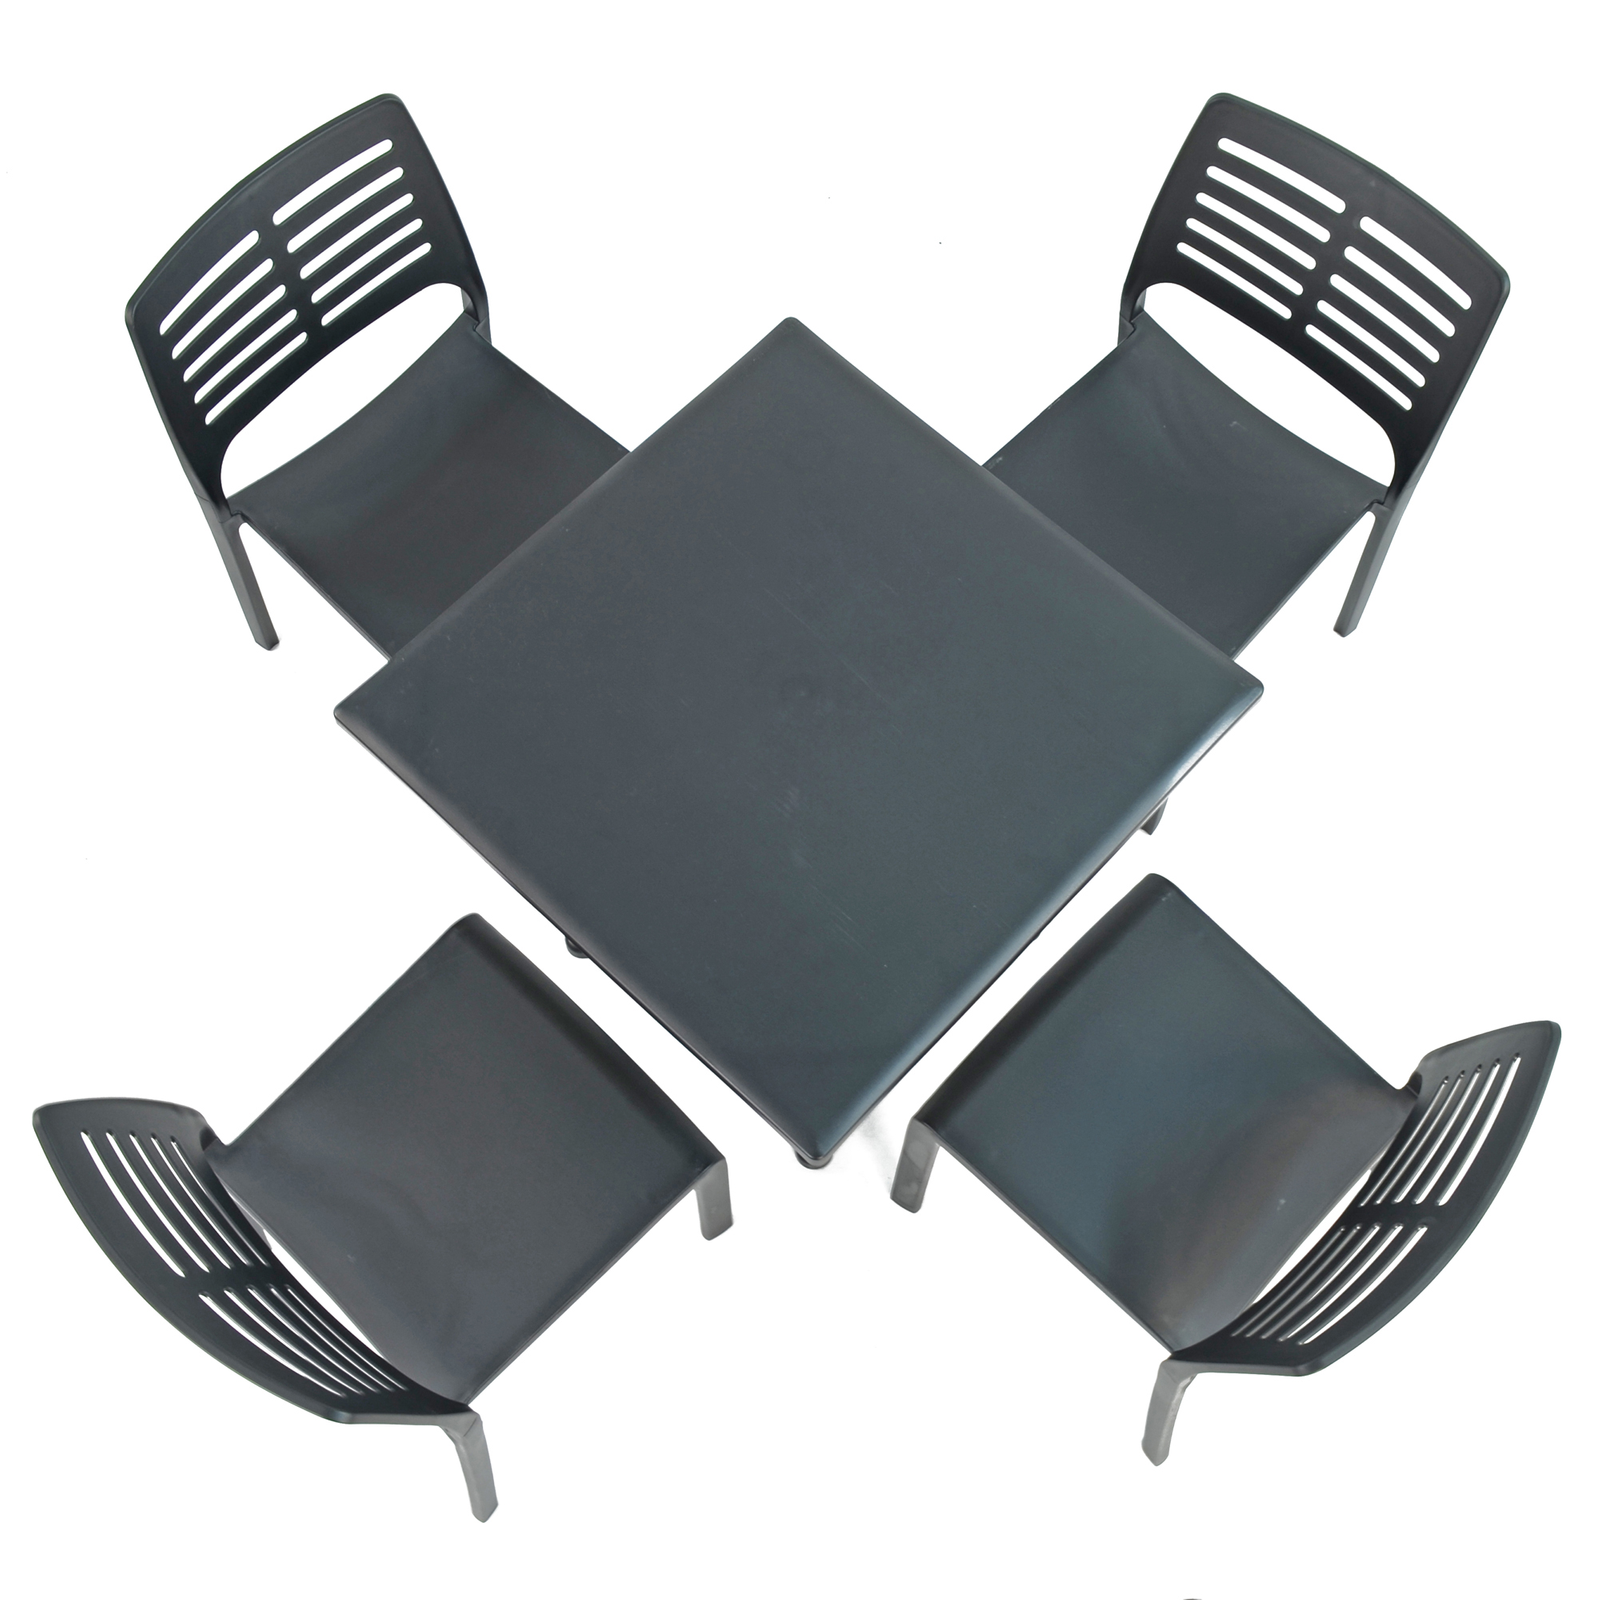 Trabella Anthracite Ponente Dining Table With 4 Mistral Chairs Dining Sets Trabella   